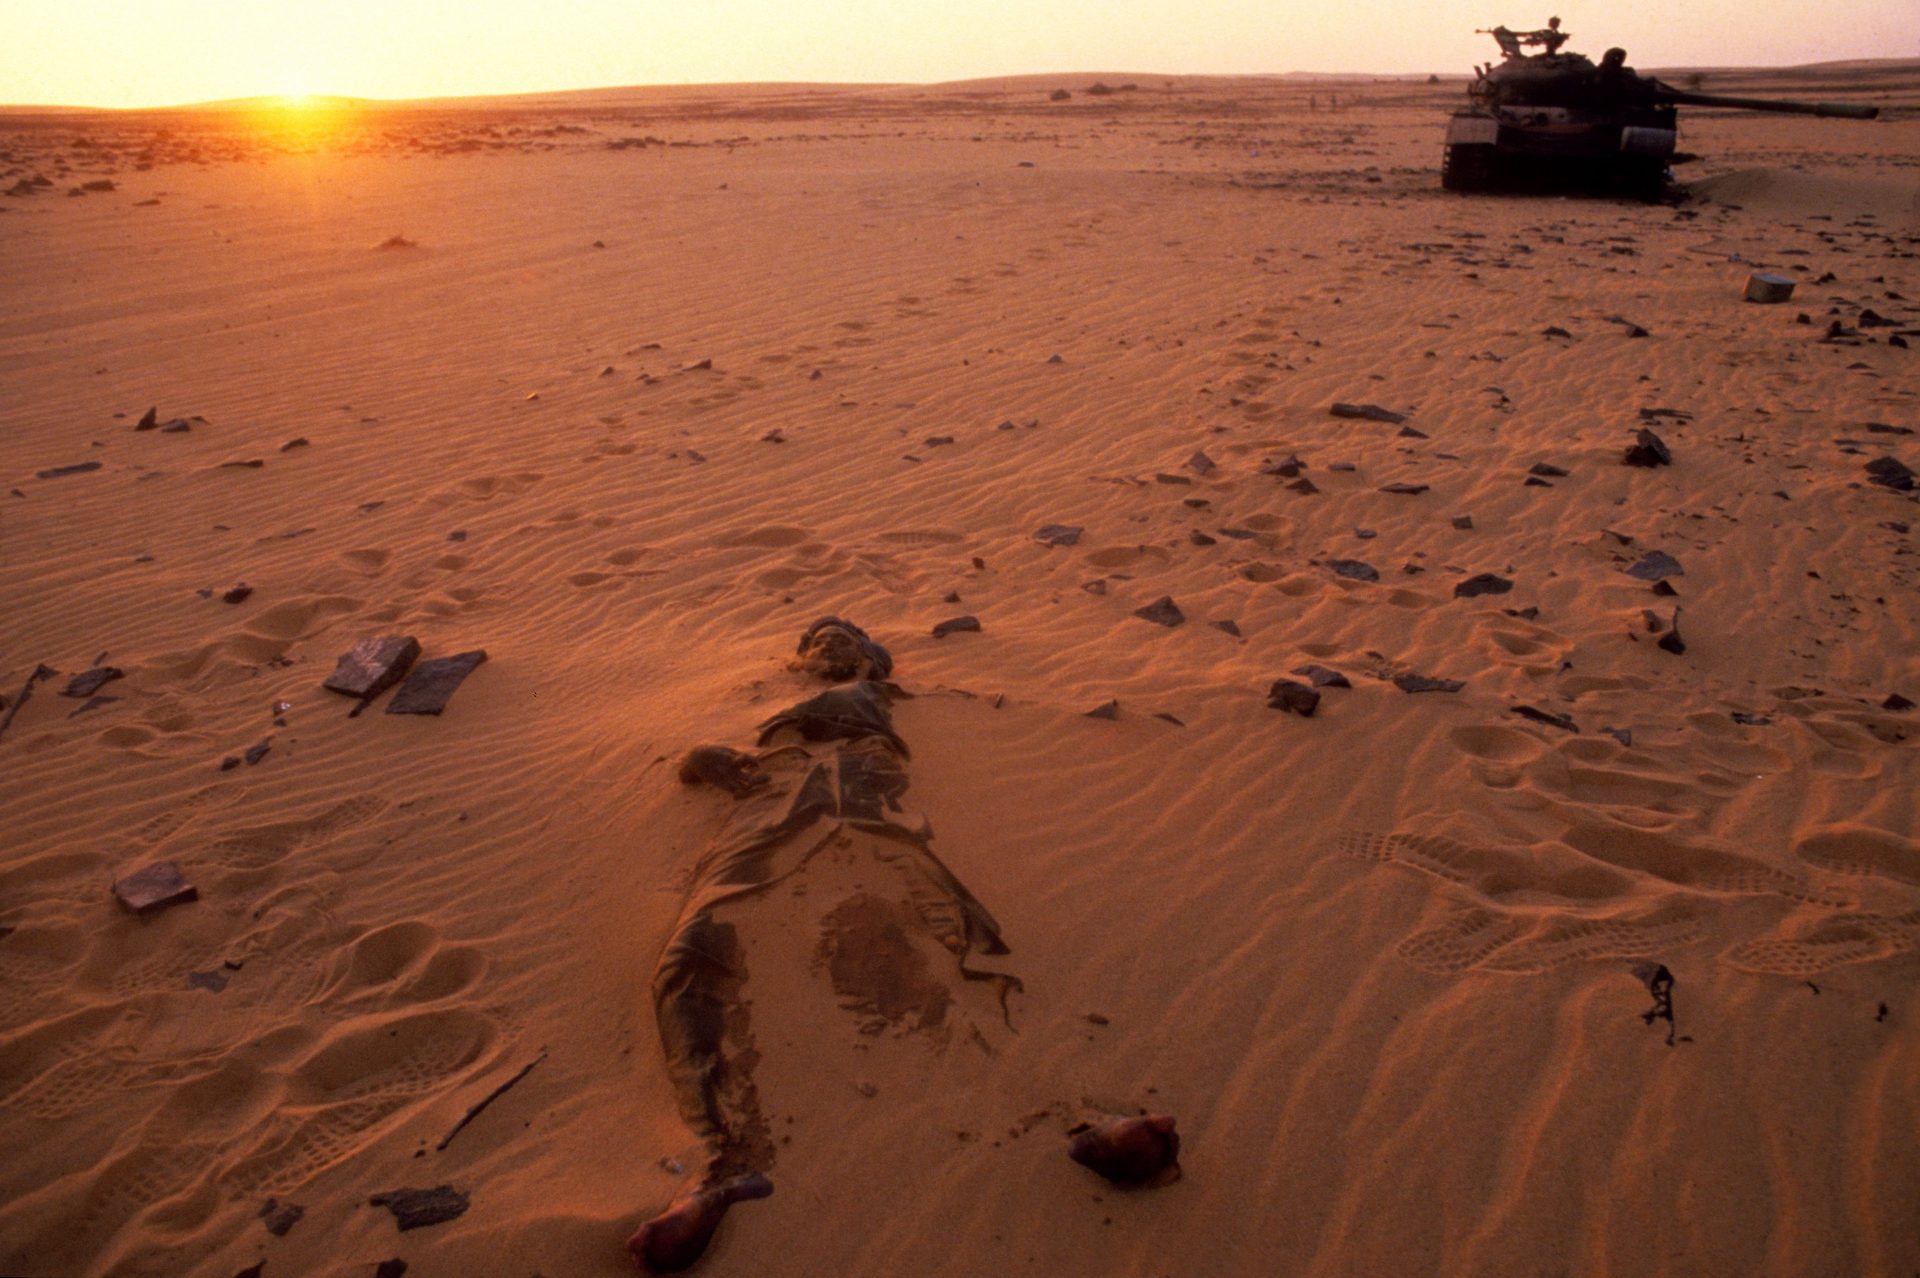 The aftermath of a desert battle between the forces of Idriss Déby and Muammar Gaddafi in northern Chad in 1987. Photo: José Nicolas/Corbis via Getty Images.